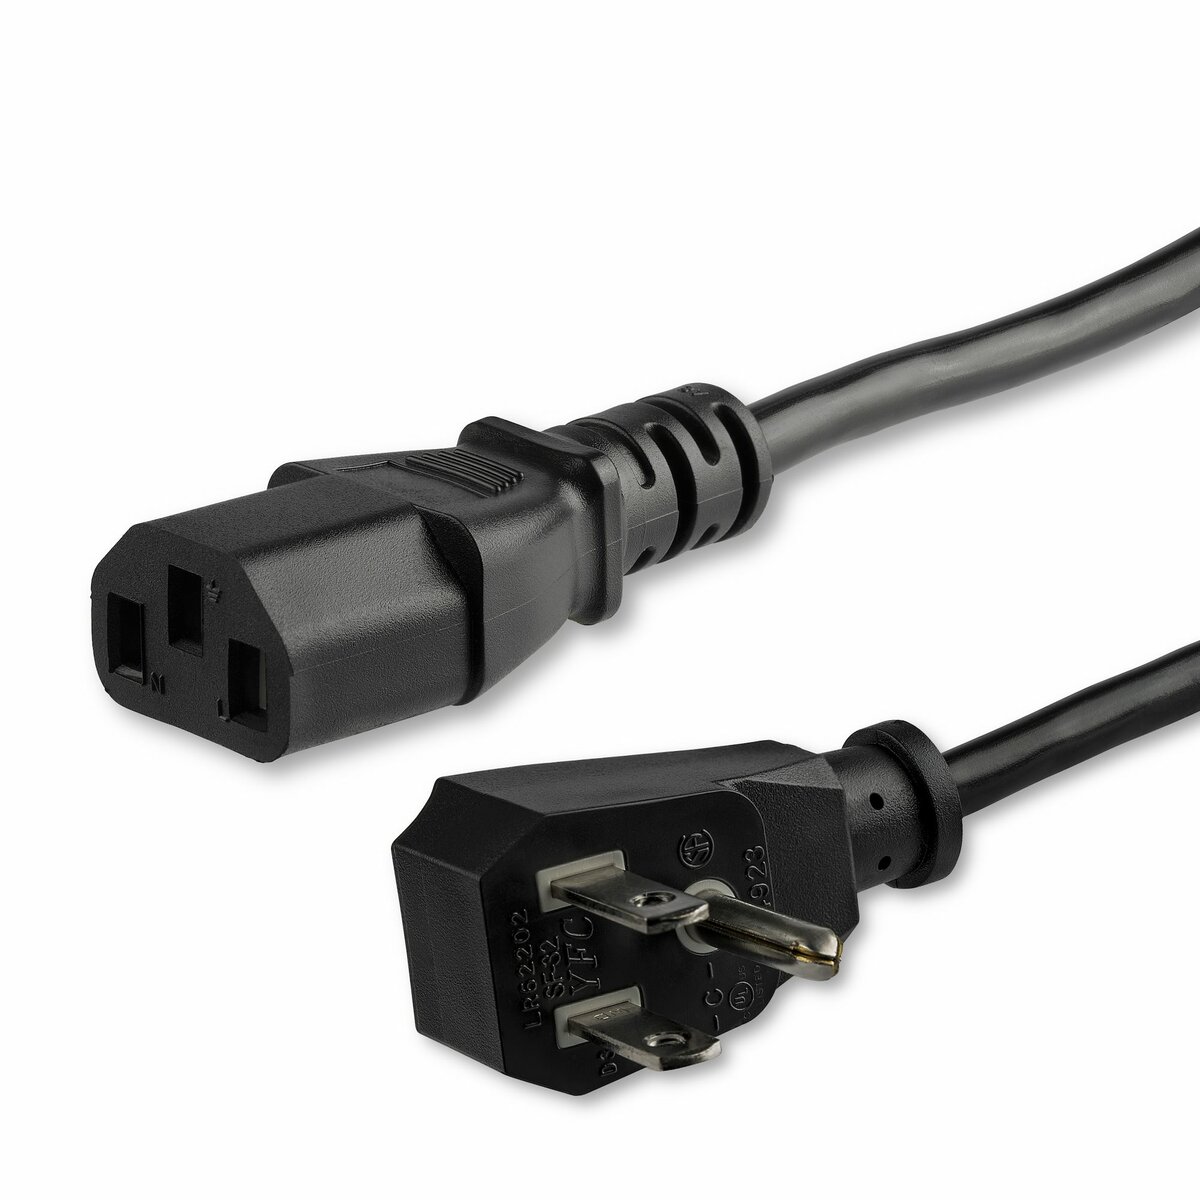 STORITE Power Cord 1.8 m UPort 3 Pin PC Power Cable IEC Mains